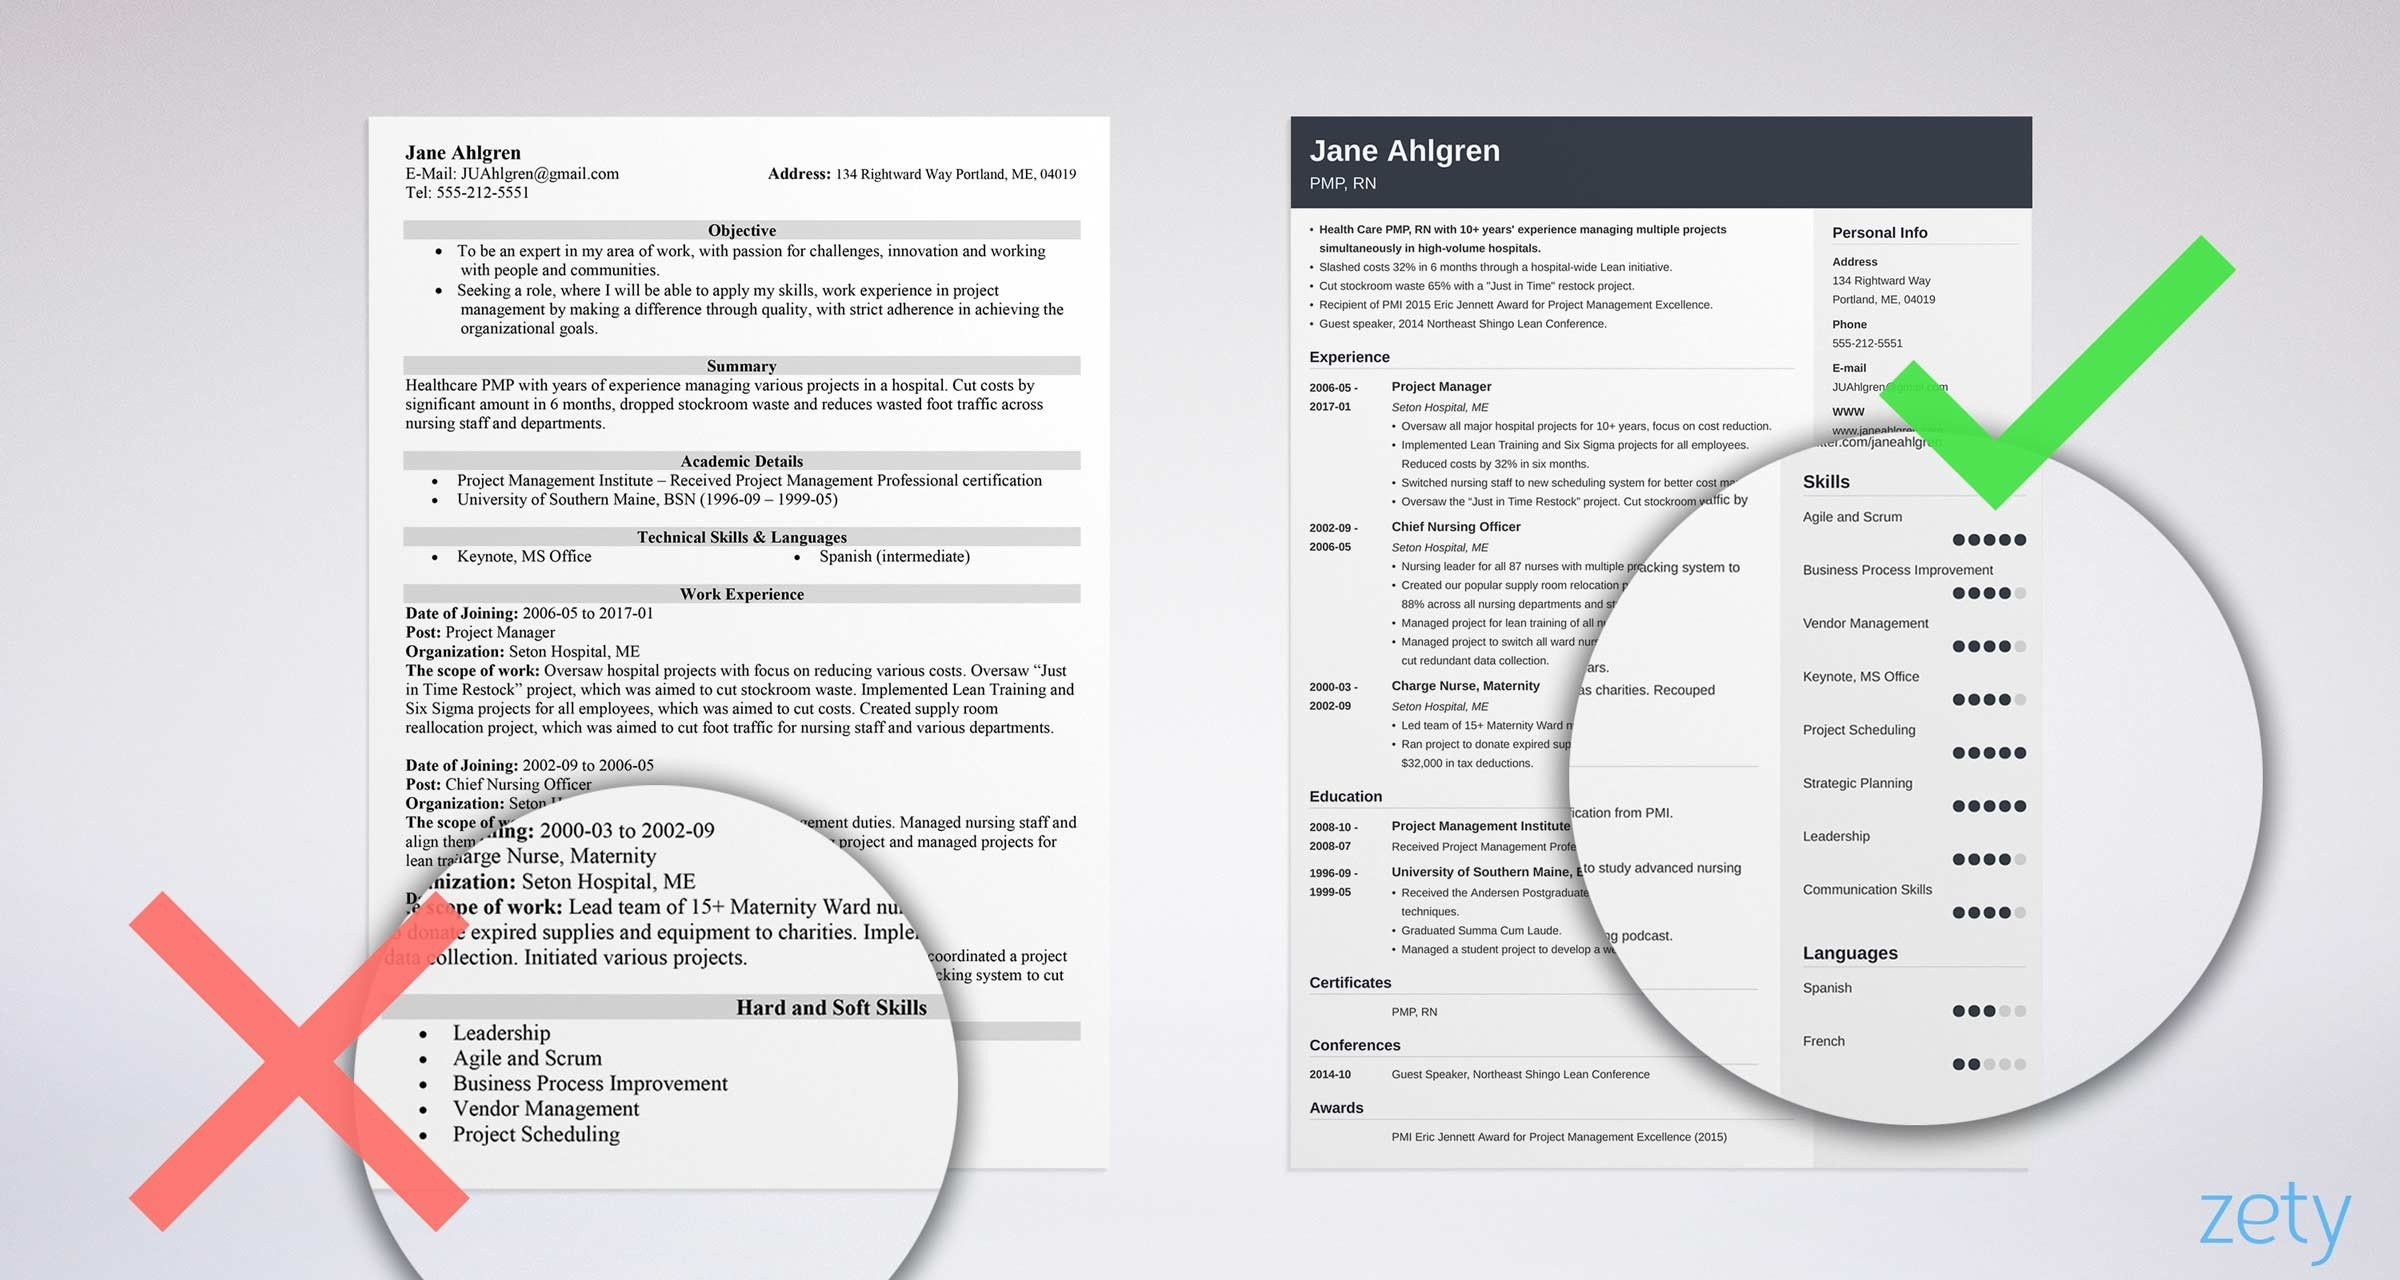 Sample Hardware Skills In A Resume top Computer Skills Examples for A Resume [lancarrezekiqsoftware List]